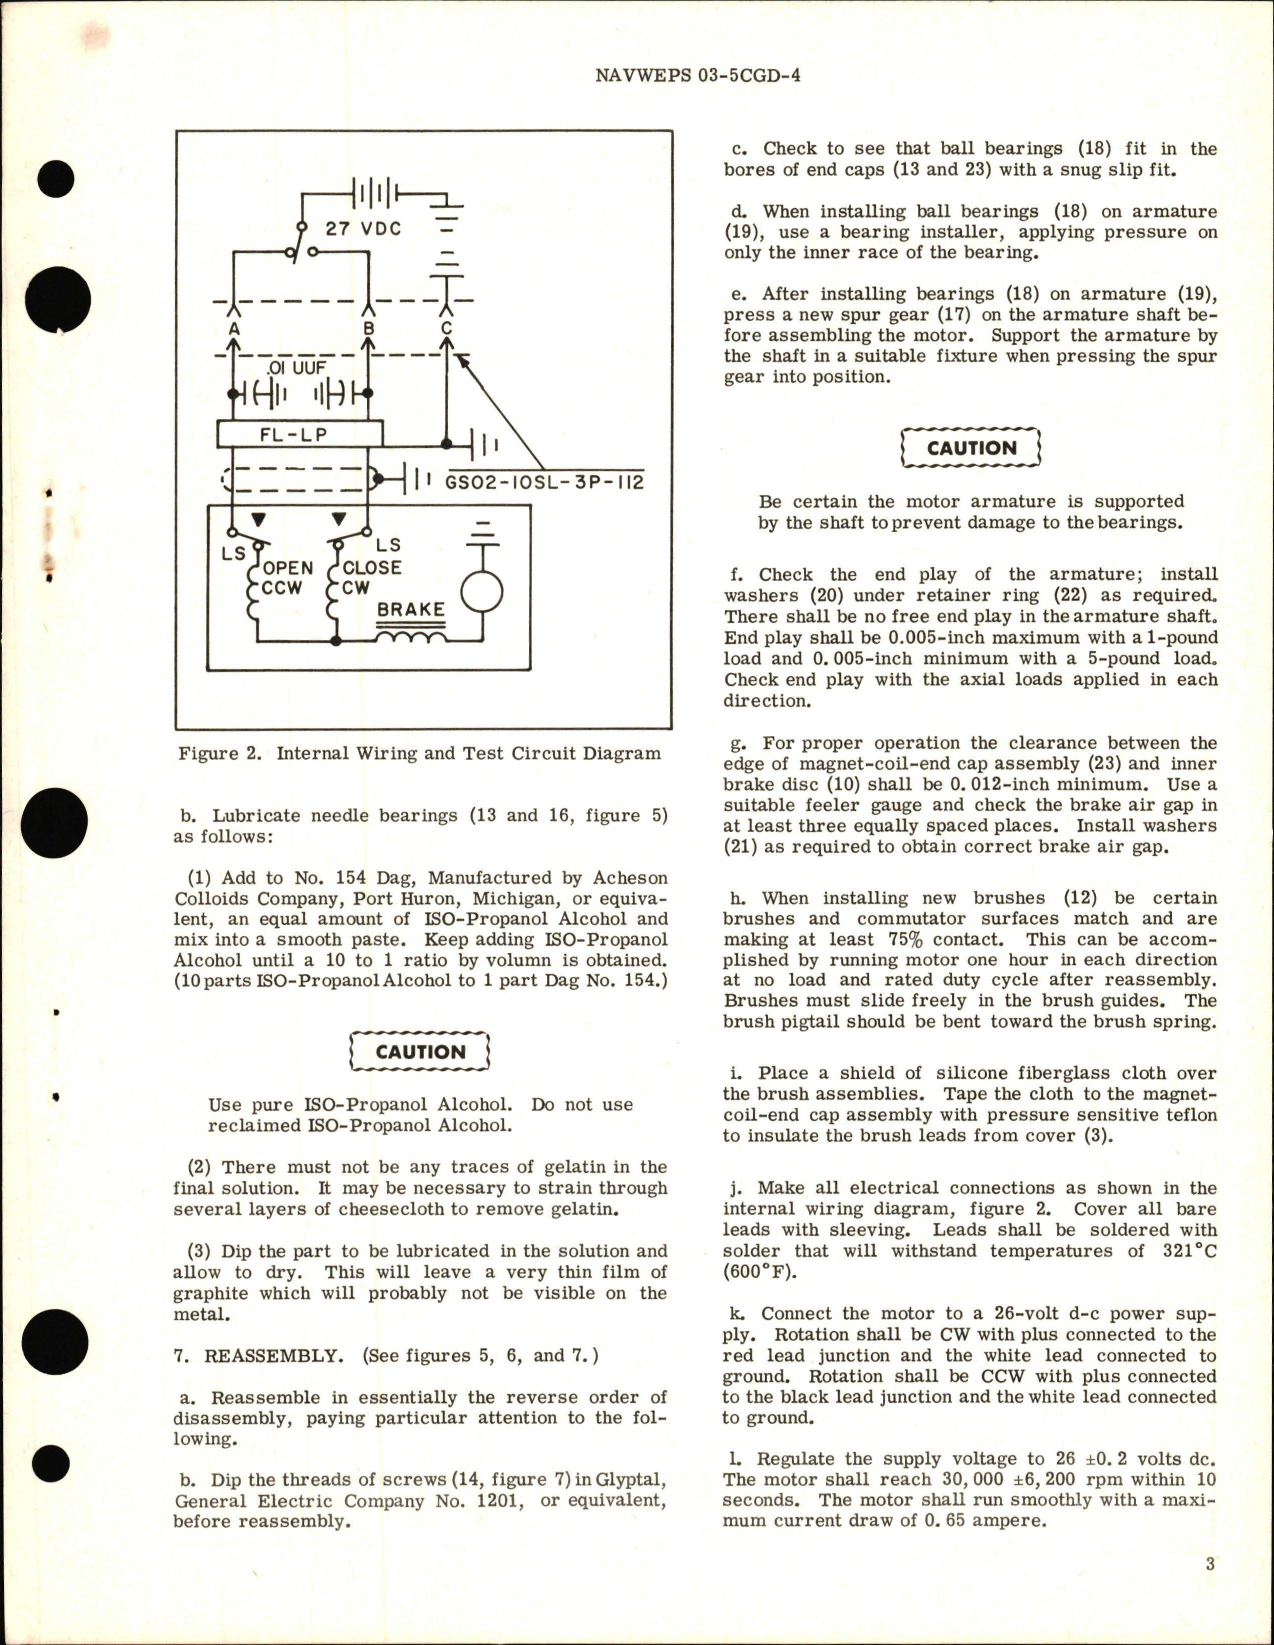 Sample page 5 from AirCorps Library document: Overhaul Instructions with Illustrated Parts Breakdown for Valve and Actuator Assembly - Part DYLZ 6537 and DYLZ 6537-1